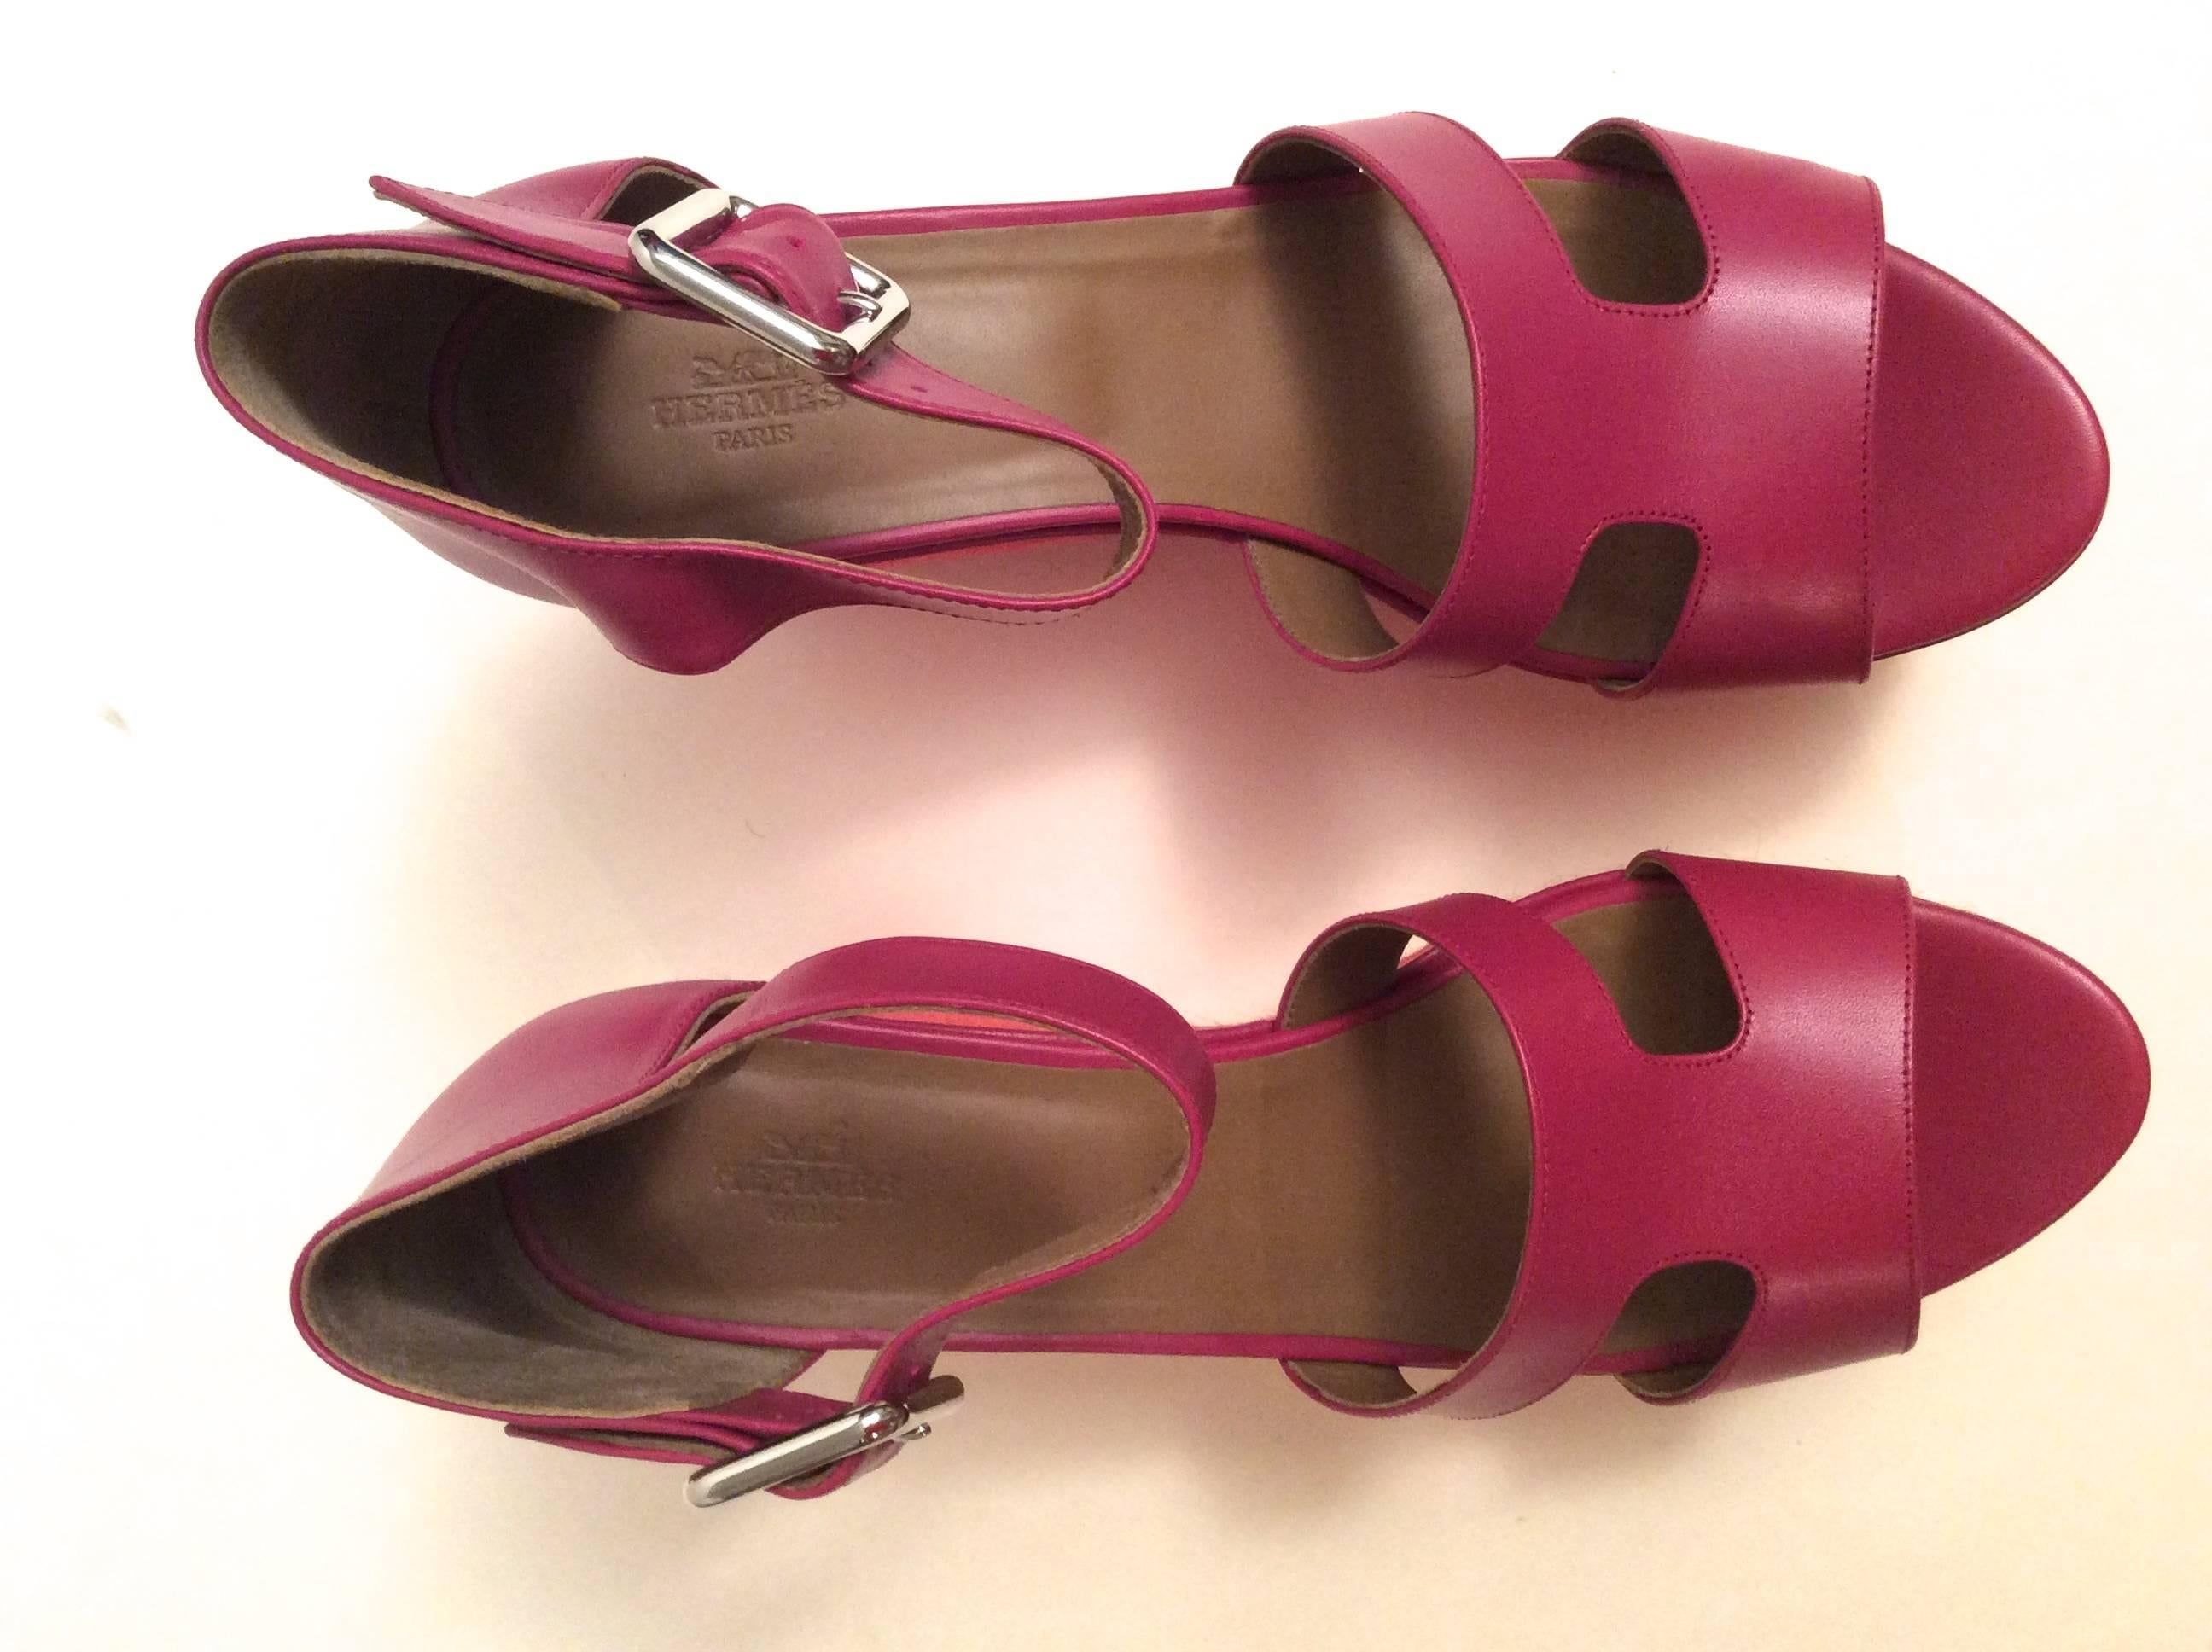 Here is a new pair of Hermes wedges in the 'espadrille' style. They are size 41 and have a magenta / fuschia coloring with pair of the braiding of the wedge having a coral tone to them. They are a magnificent addition to any fashion wardrobe and are